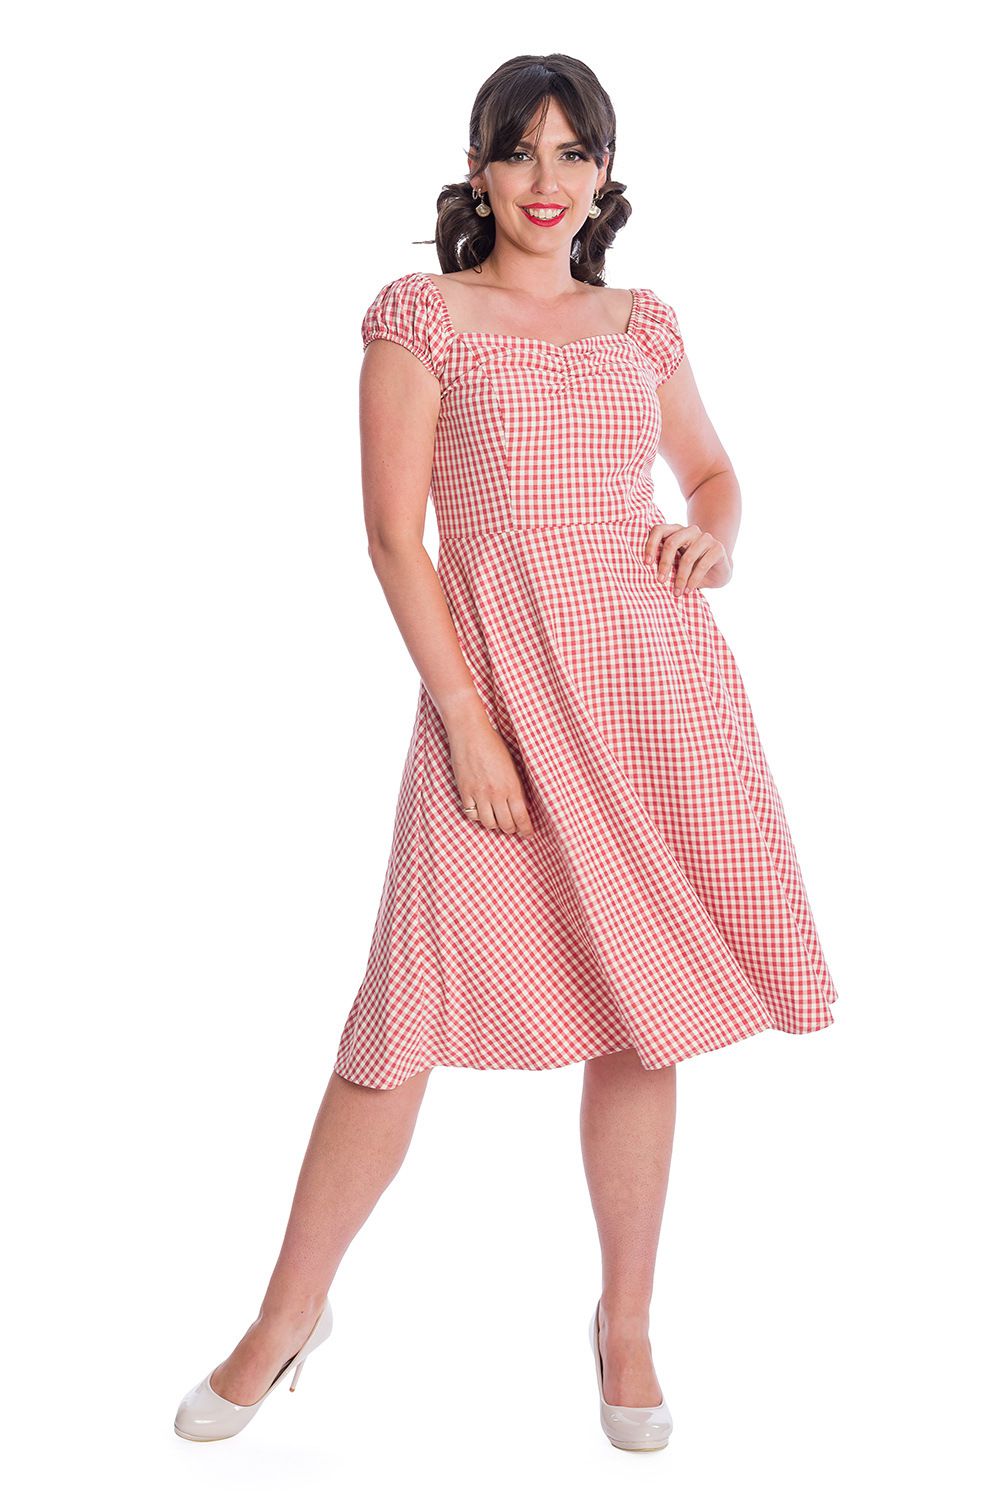 BNDR16623_robe-retro-pinup-50-s-rockabilly-banned-gingham-picnic